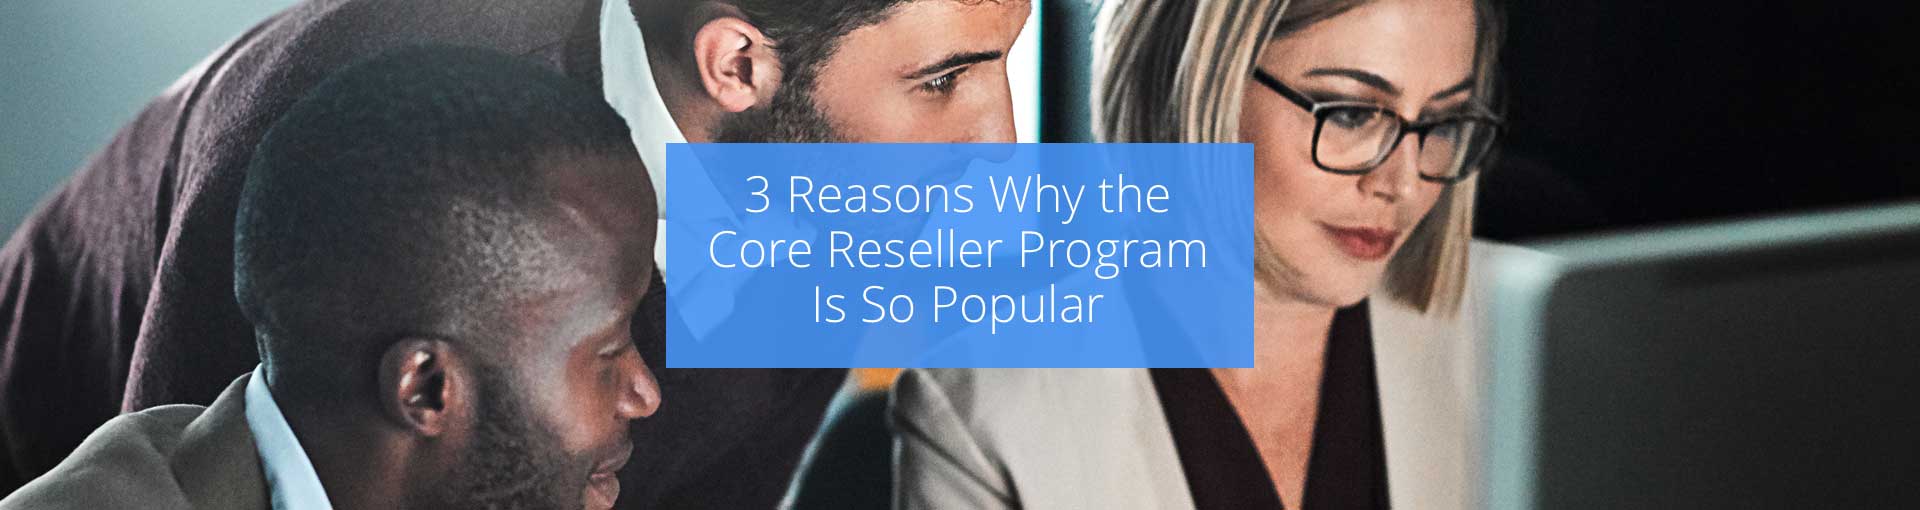 3 Reasons Why the Core Reseller Program Is So Popular Featured Image